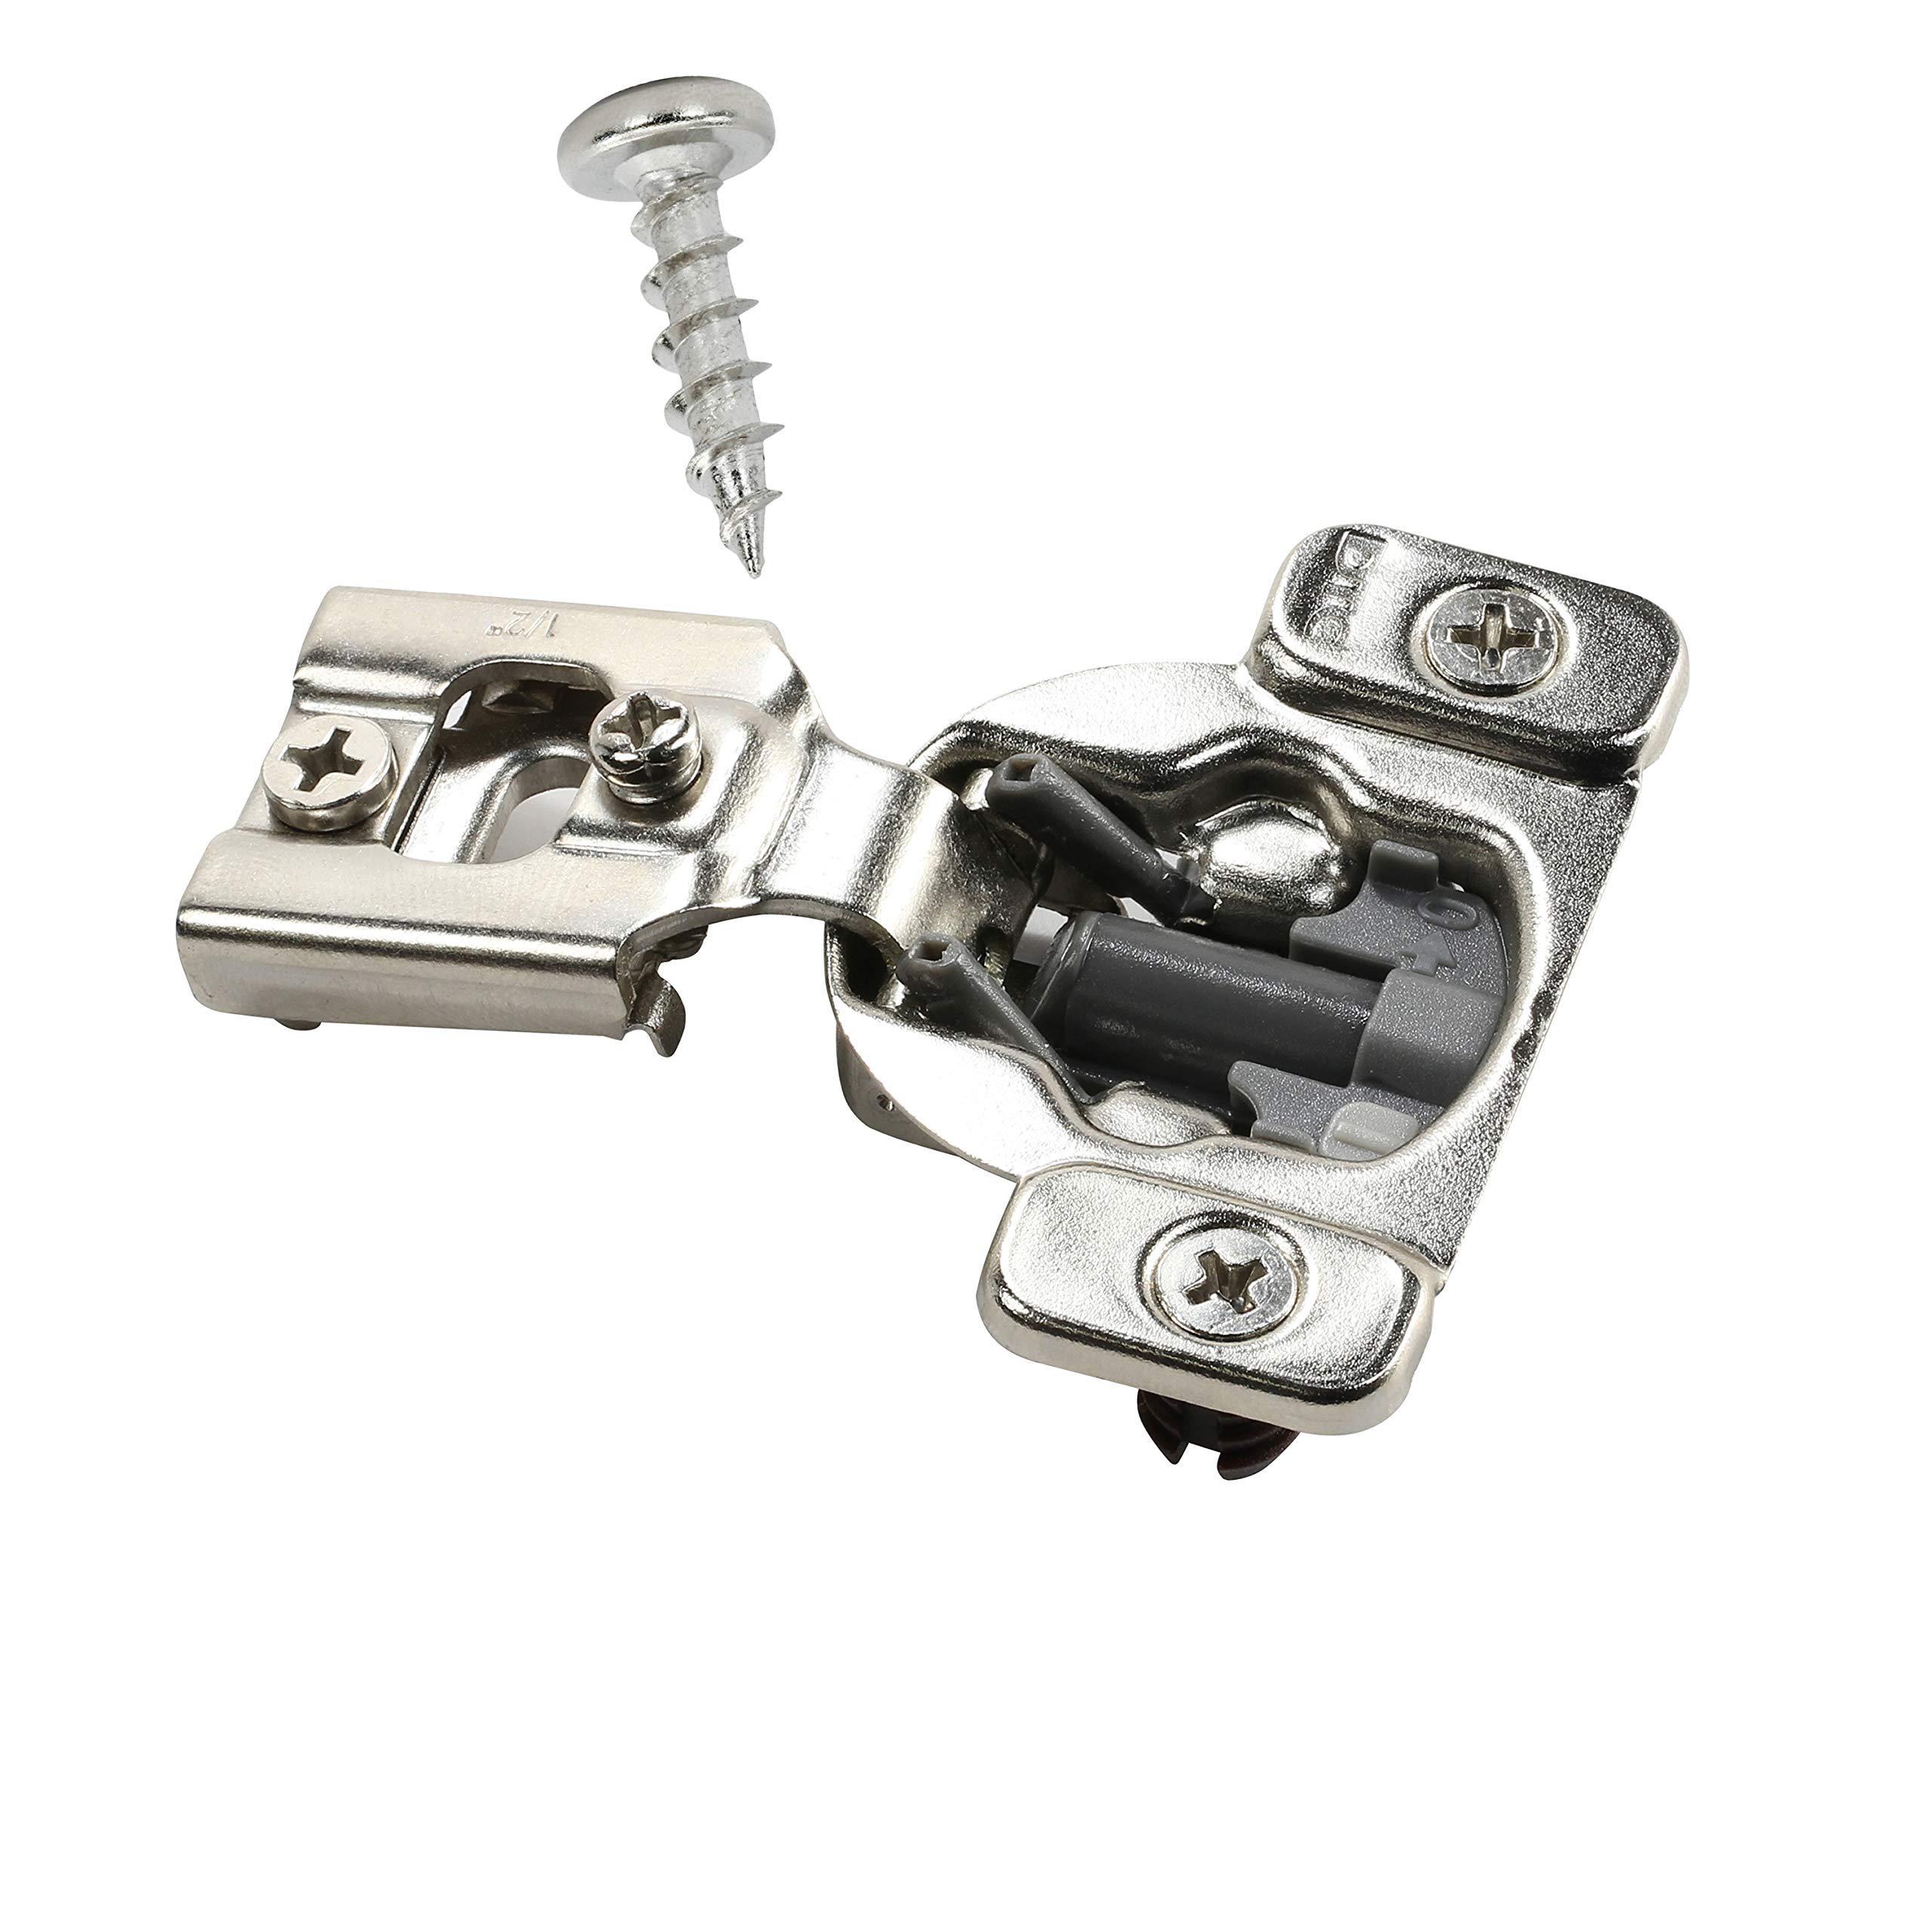 Rok dtc 1/2" overlay soft close 105 degree 2 cam press in face frame cabinet hinge h8e055h (2 pack)